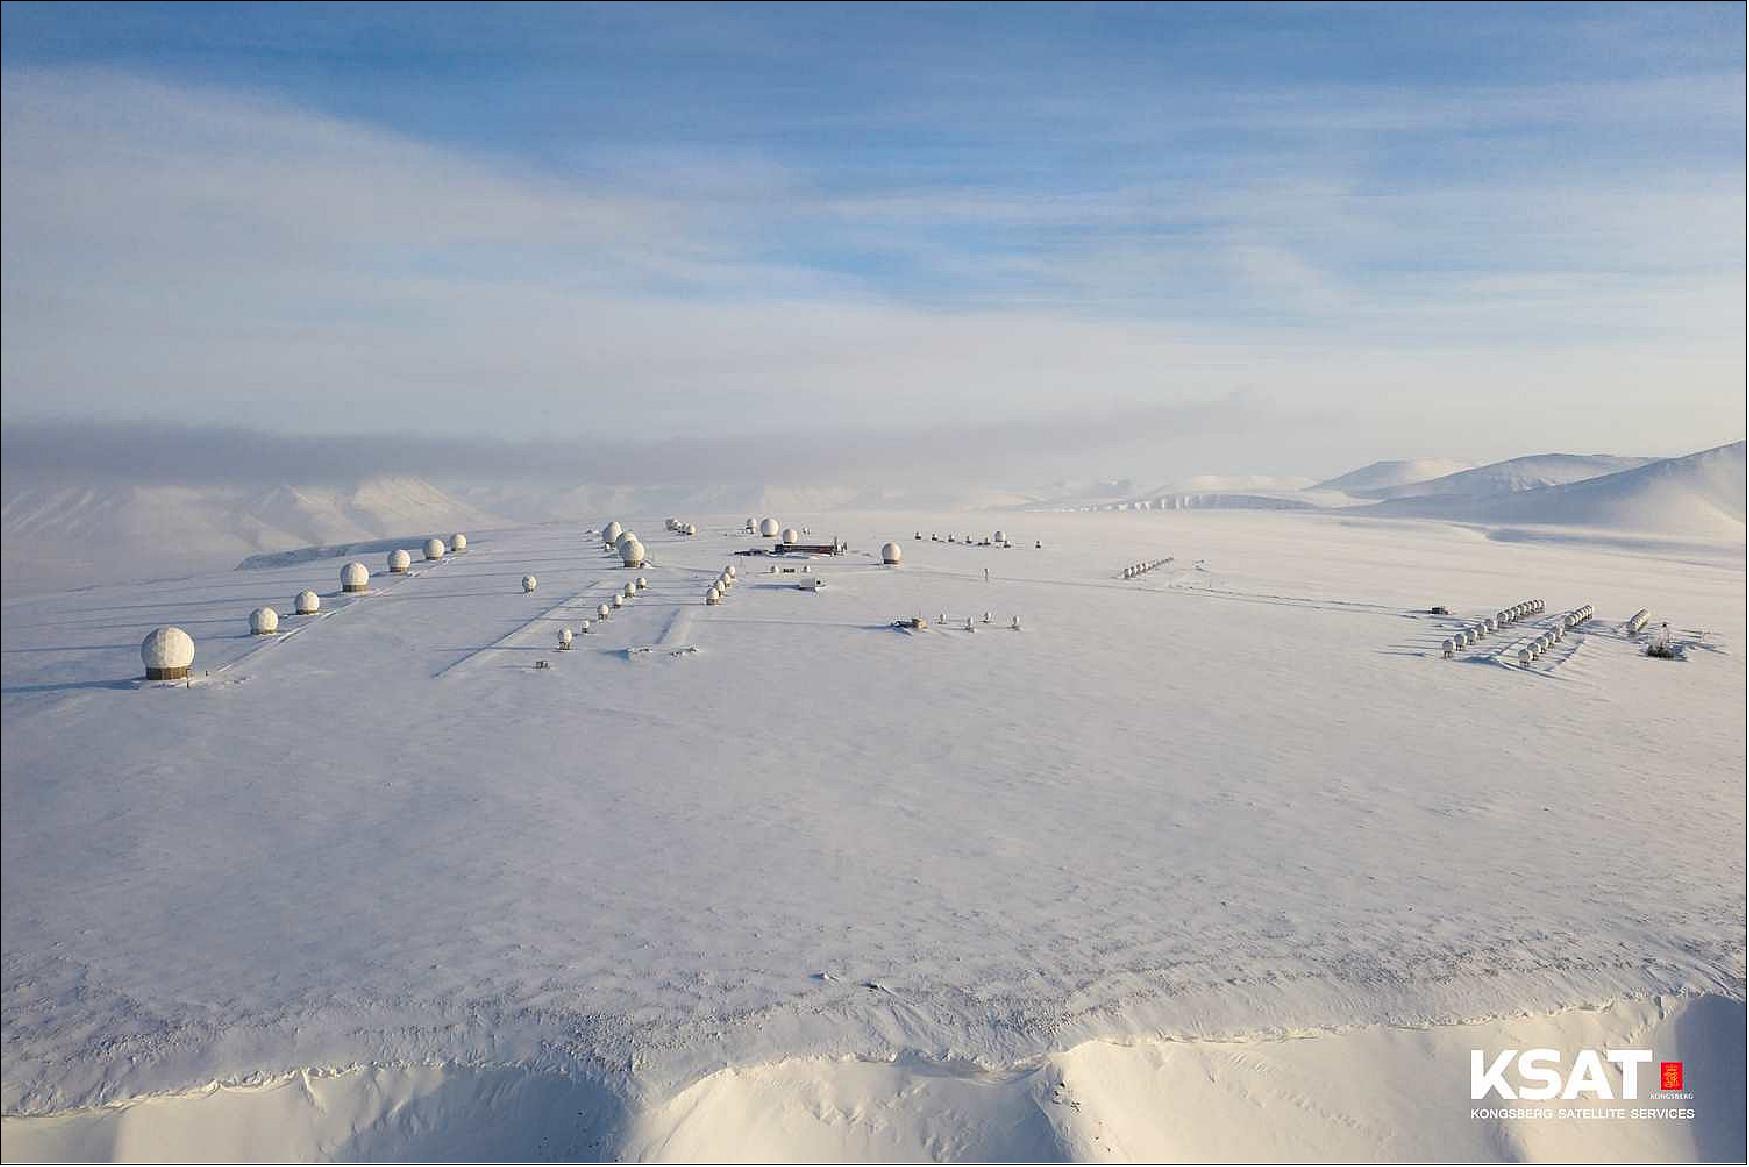 Figure 3: As of October 2020, KSAT has 24 ground station sites around the world for satellite data reception, Svalbard is the world's largest and uniquely located at 78º North. The Svalbard Satellite Station is also referred to as SvalSat. SvalSat, located only 1200 km south of the North Pole on Spitsbergen, is recognized as the most optimally located ground station in the world for satellite control. Today SvalSat comprises a state of the art station building operated by a team of skilful and experienced engineers and operators 24/7 365 days a year. The SvalSat site offers a large amount of flexibility for our customers and has a vast potential for further expansion. (image credit: KSAT)